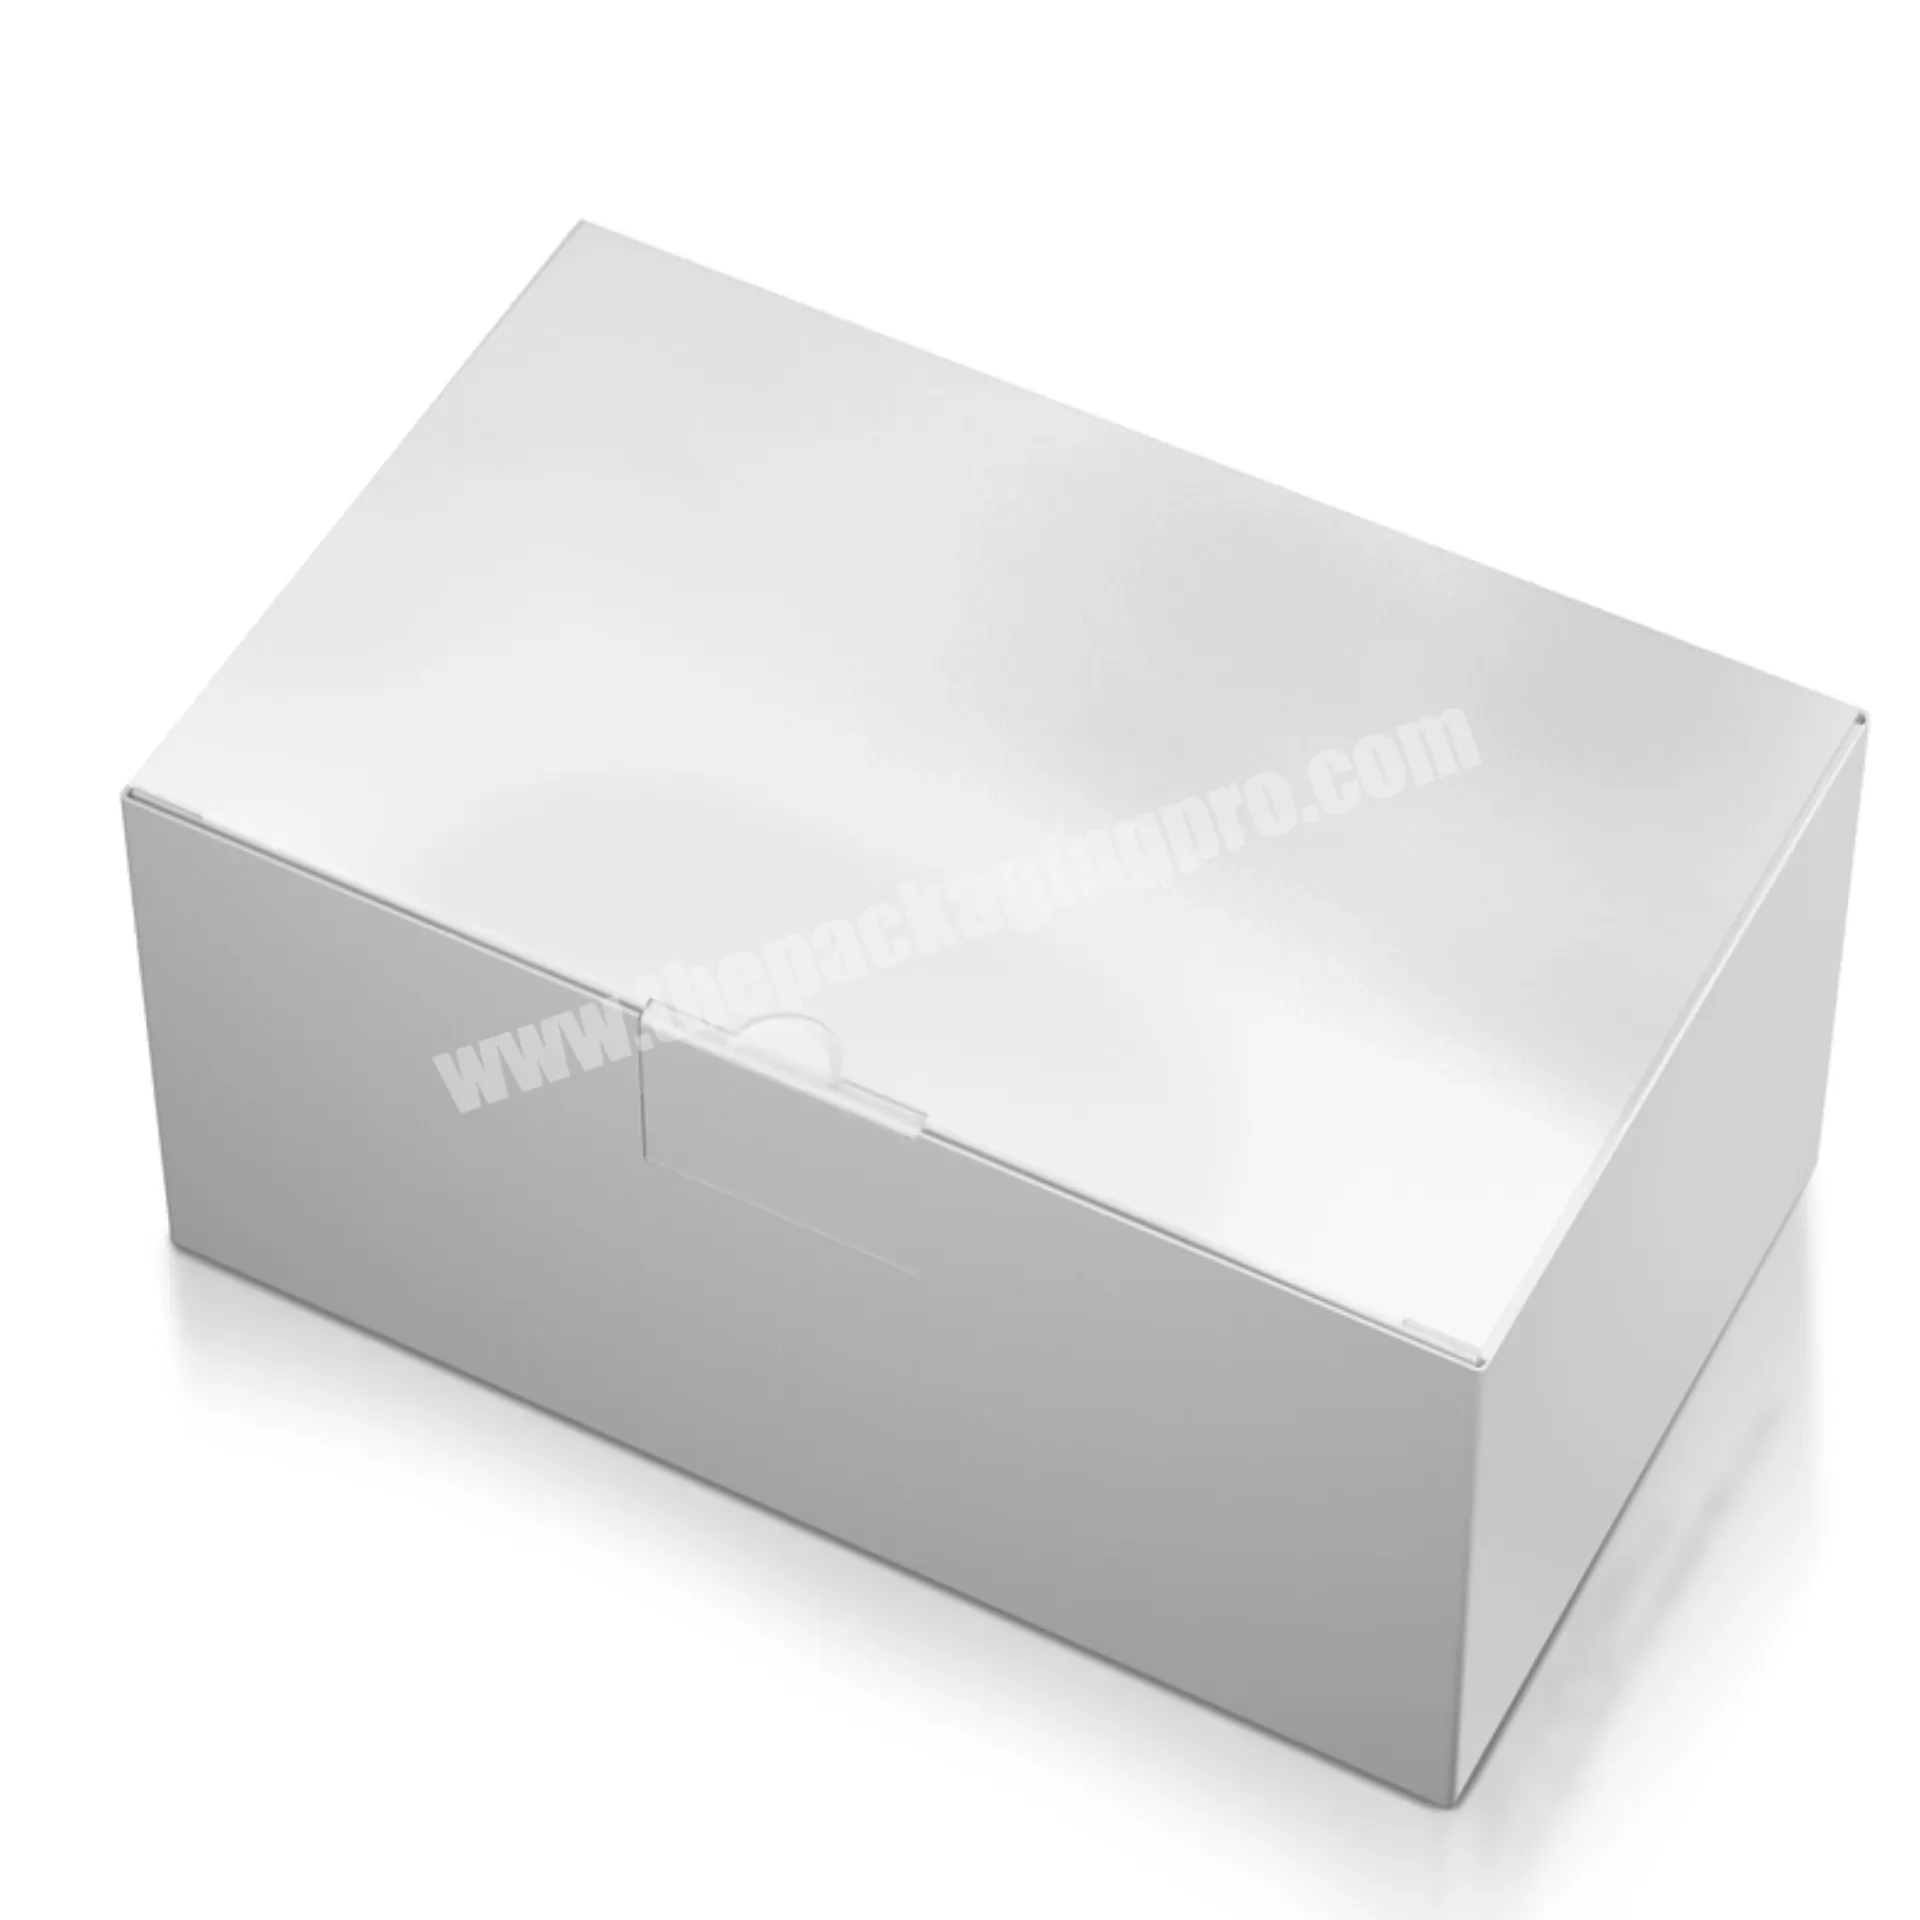 Customized Product Packaging Small White Box Packaging,Plain White Paper Box,White Cardboard Cosmetic Box - Buy Small White Box Packaging,Plain White Paper Box,White Cardboard Box.